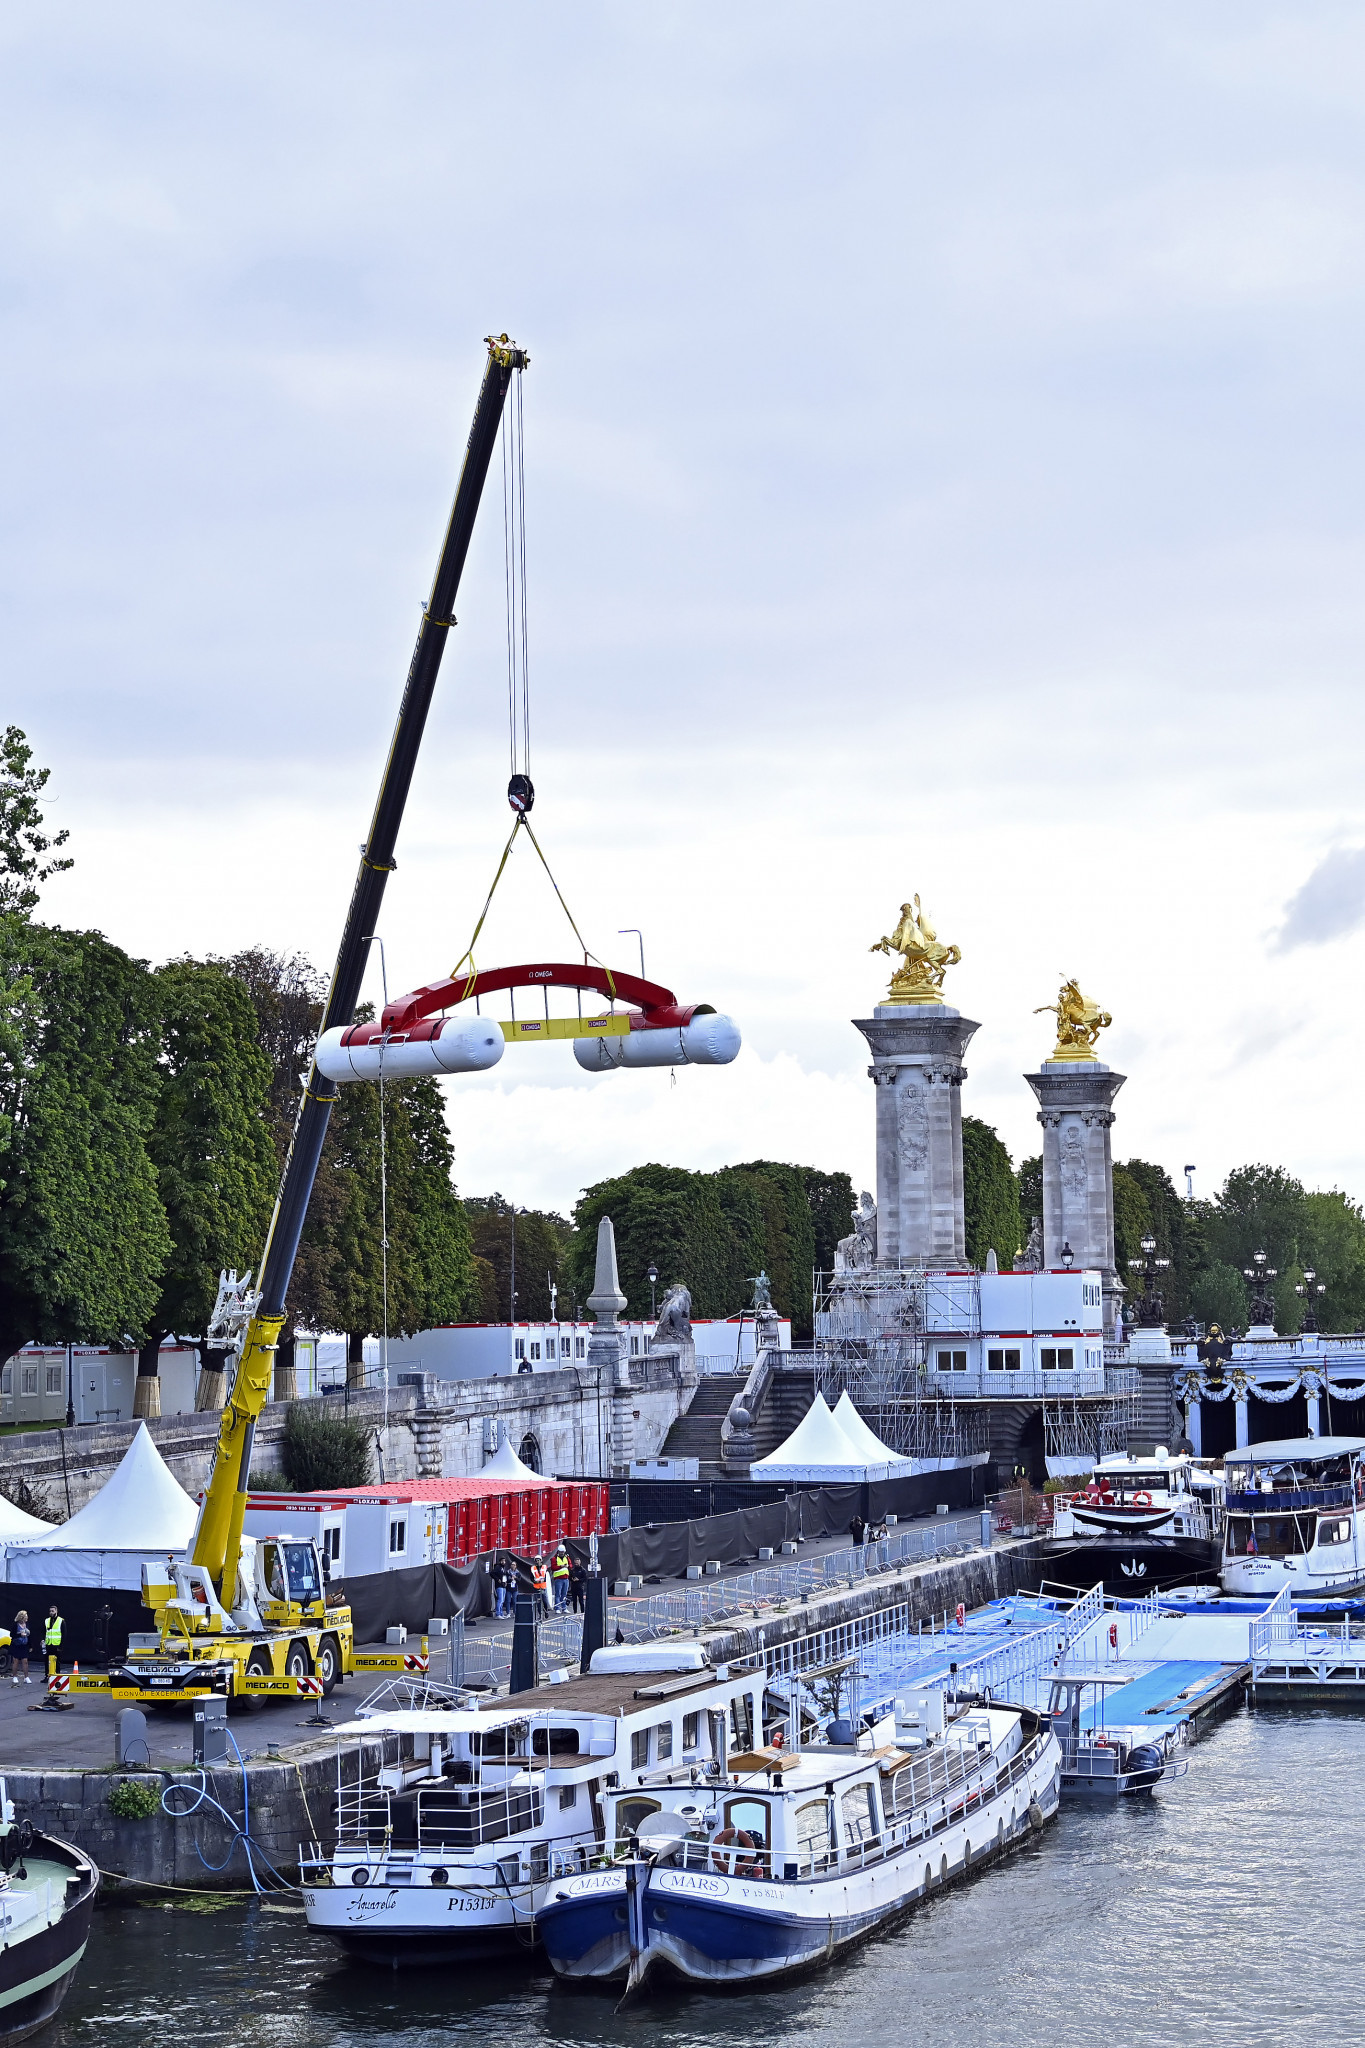 A crane removes the finishing pontoon after the cancellation of the World Aquatics Open Water Swimming World Cup event in Paris ©Getty Images